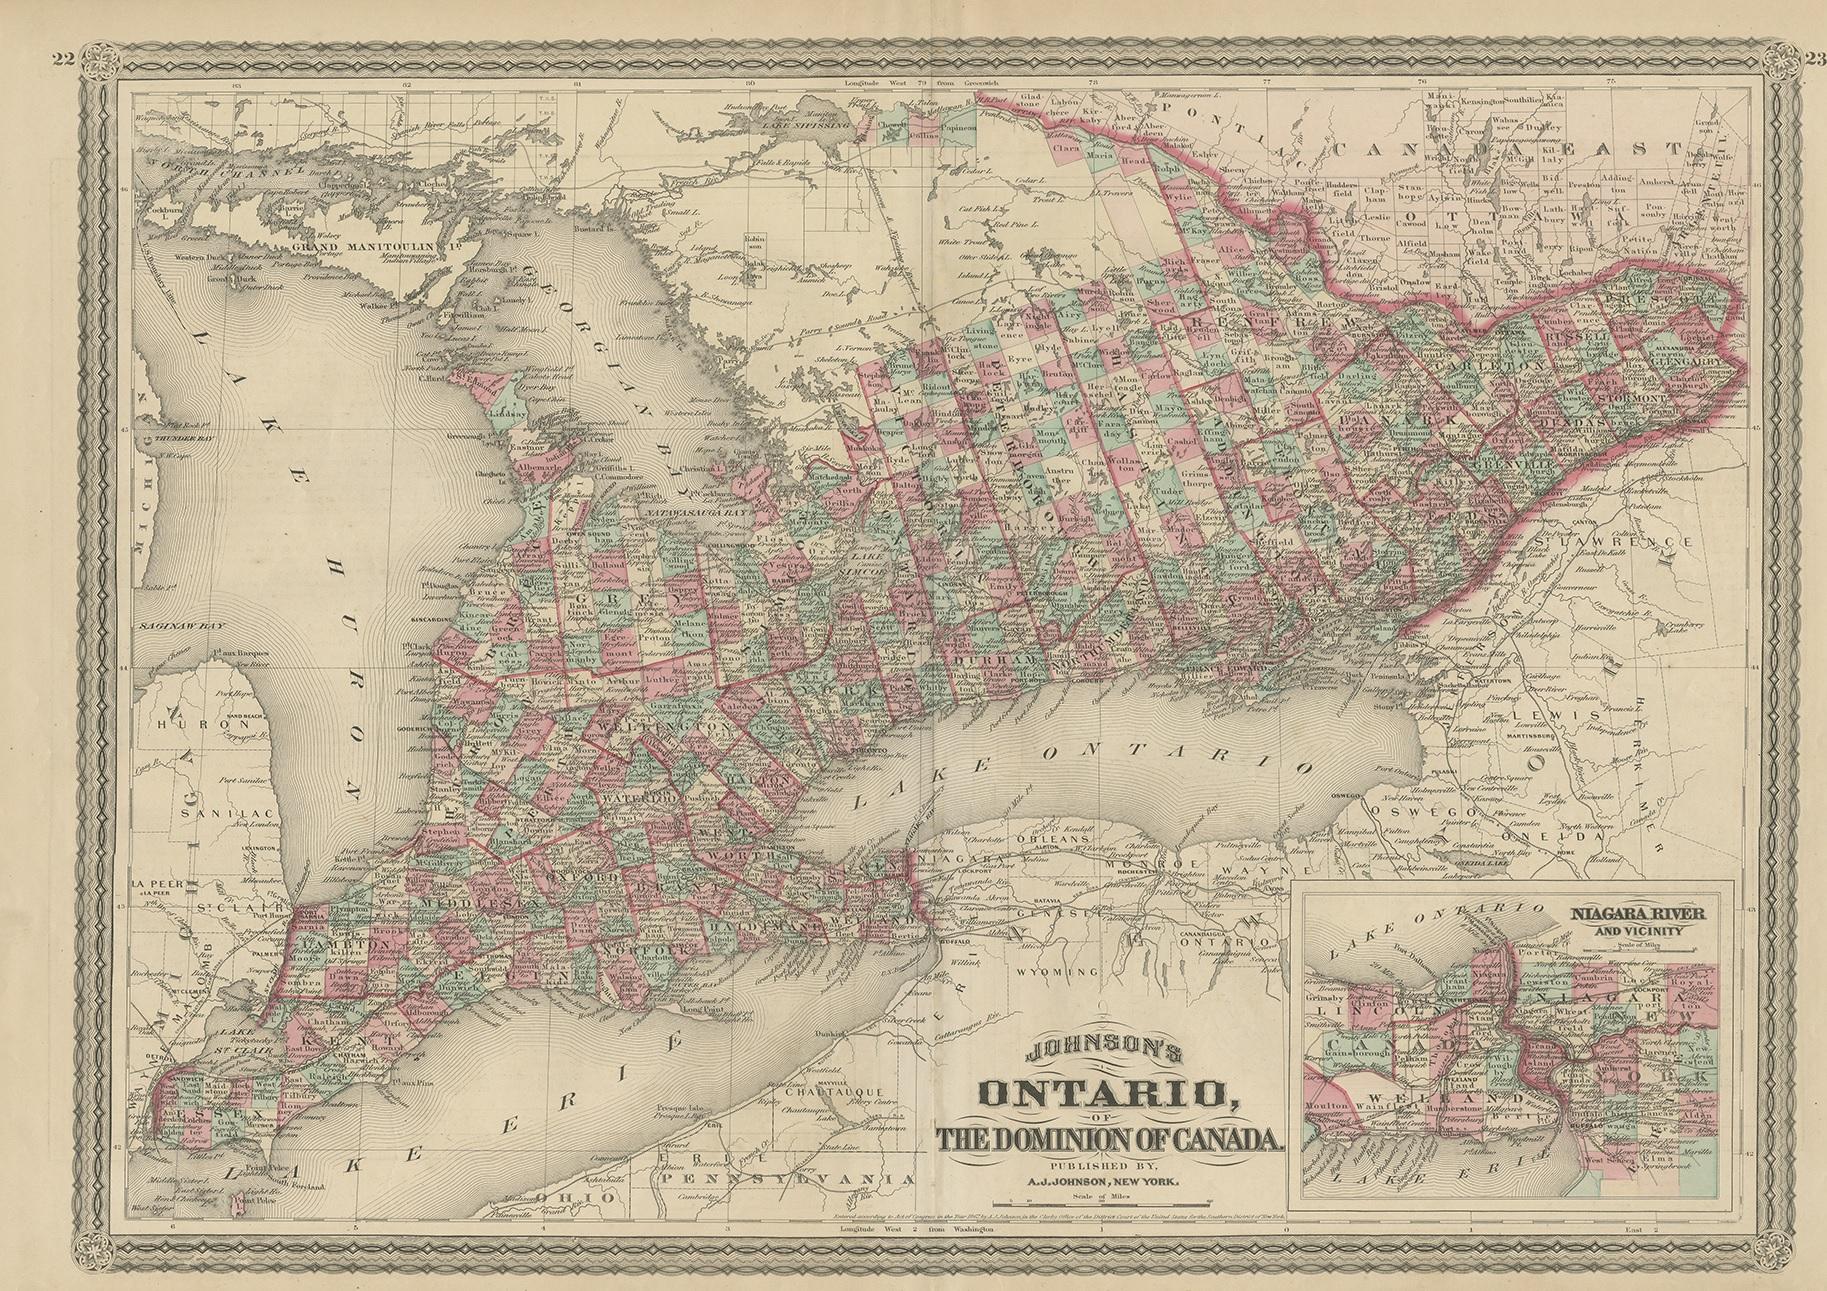 Antique map titled 'Johnson's Ontario, of the dominion of Canada (..)'. Original map of Ontario, Canada, with an inset map of the Niagara River and vicinity. This map originates from 'Johnson's New Illustrated Family Atlas of the World' by A.J.